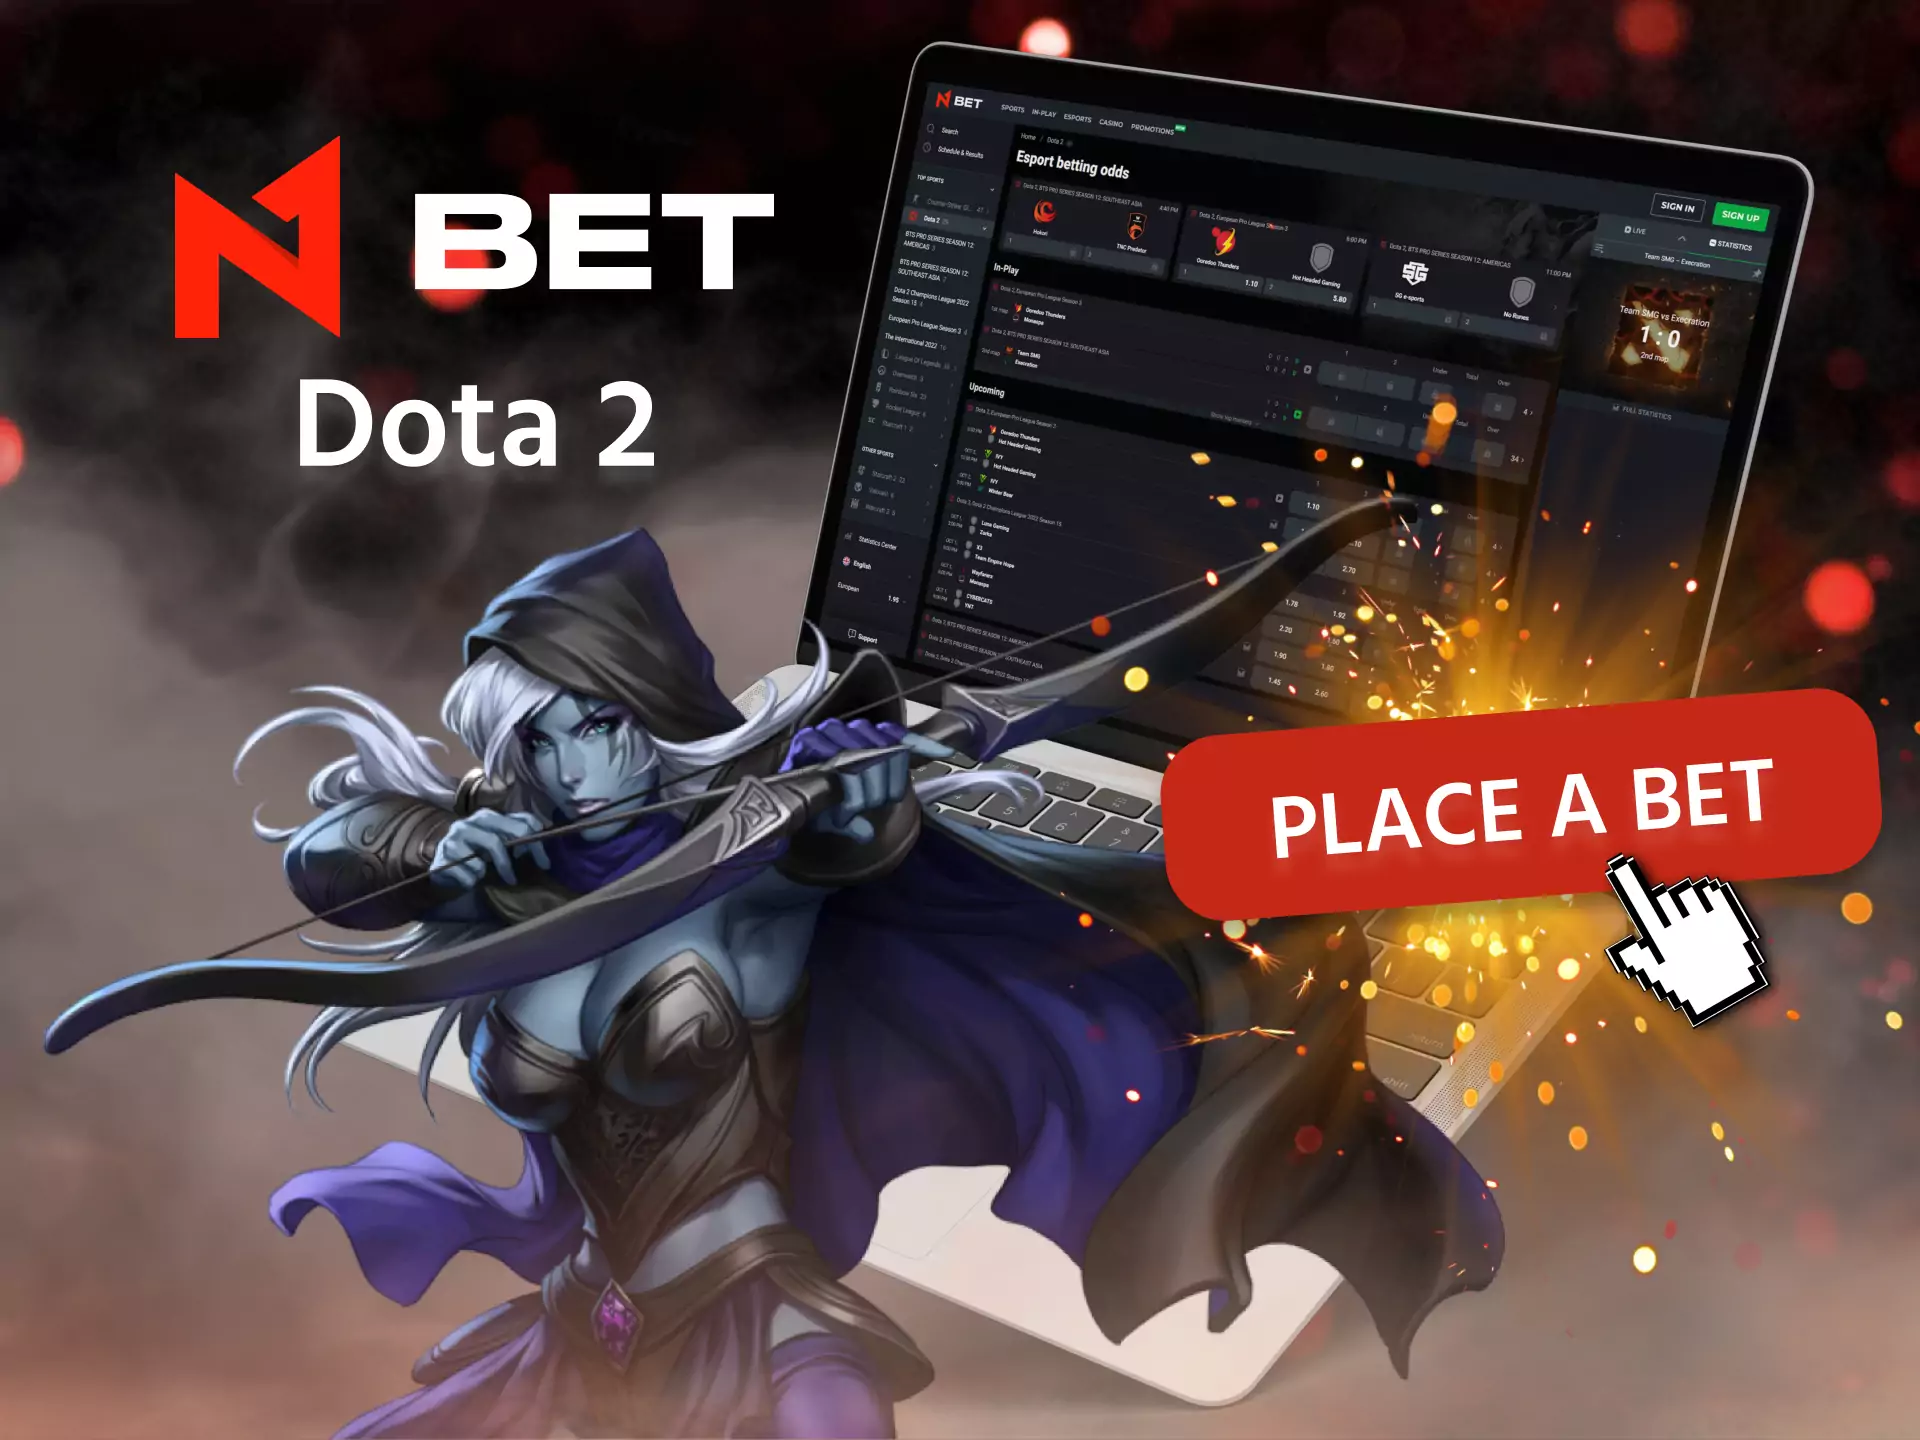 Place bets on Dota 2 in N1Bet.